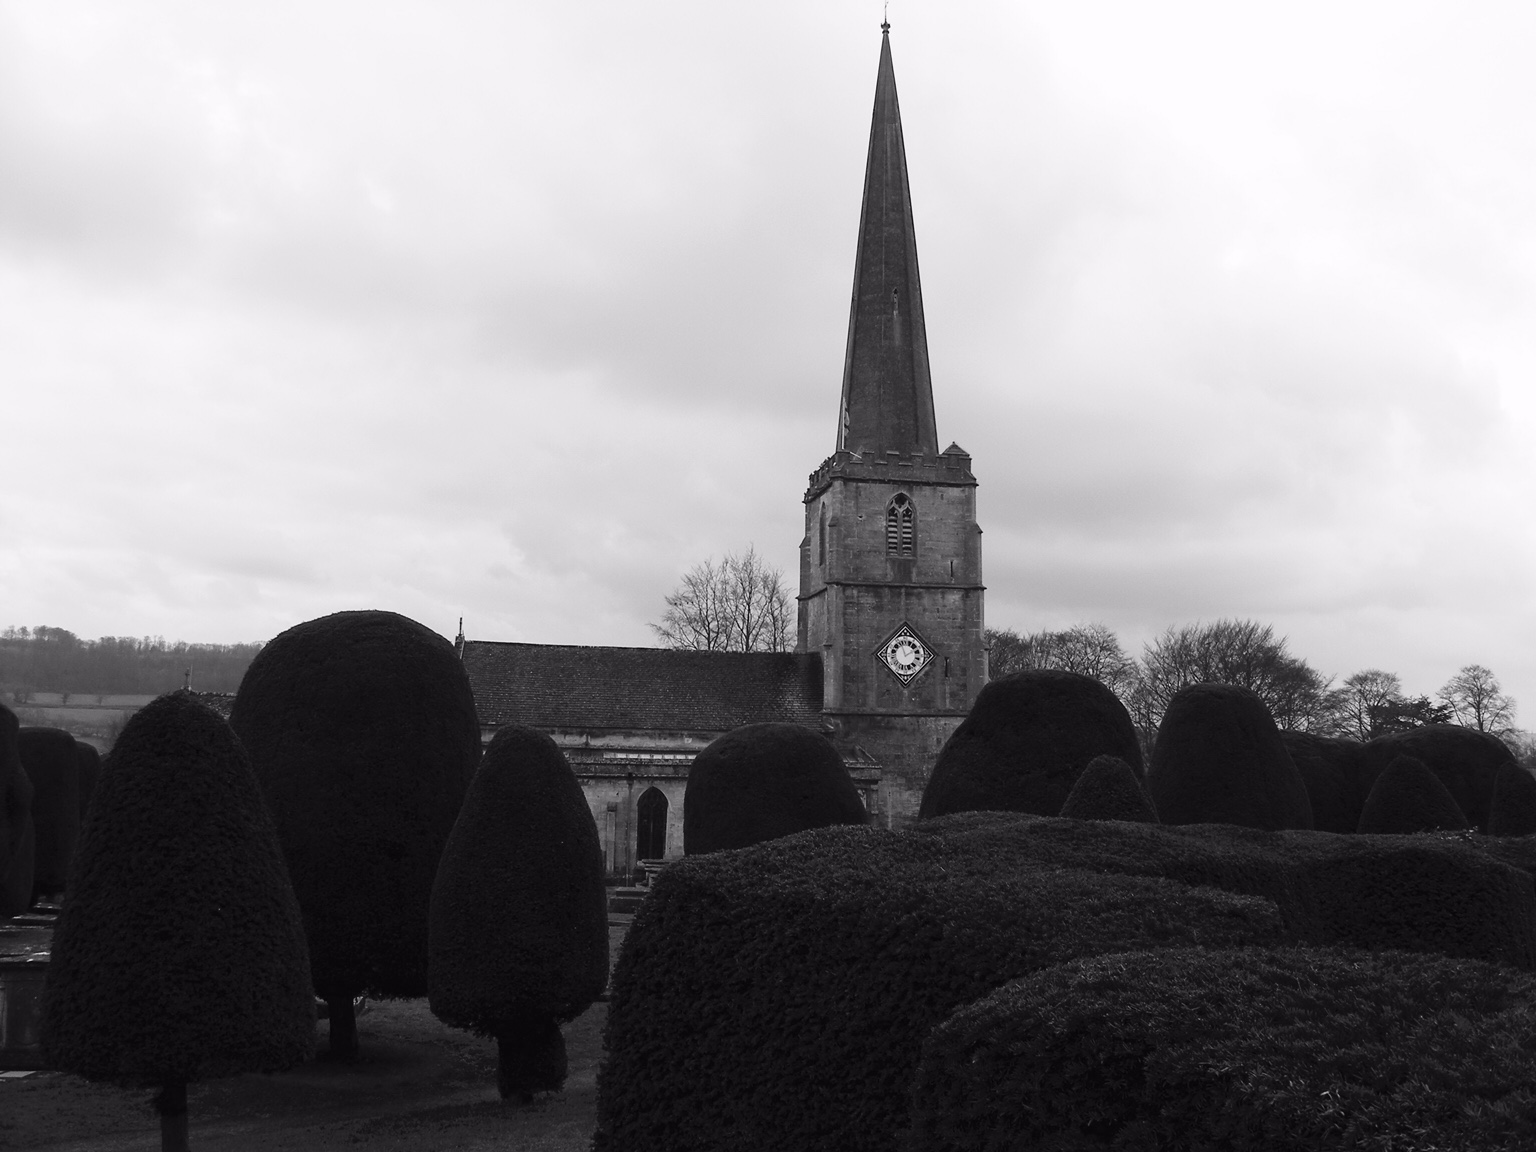 Cotswold Granny: St Mary Painswick. The church of 99 yew trees (all numbered with small plaques).